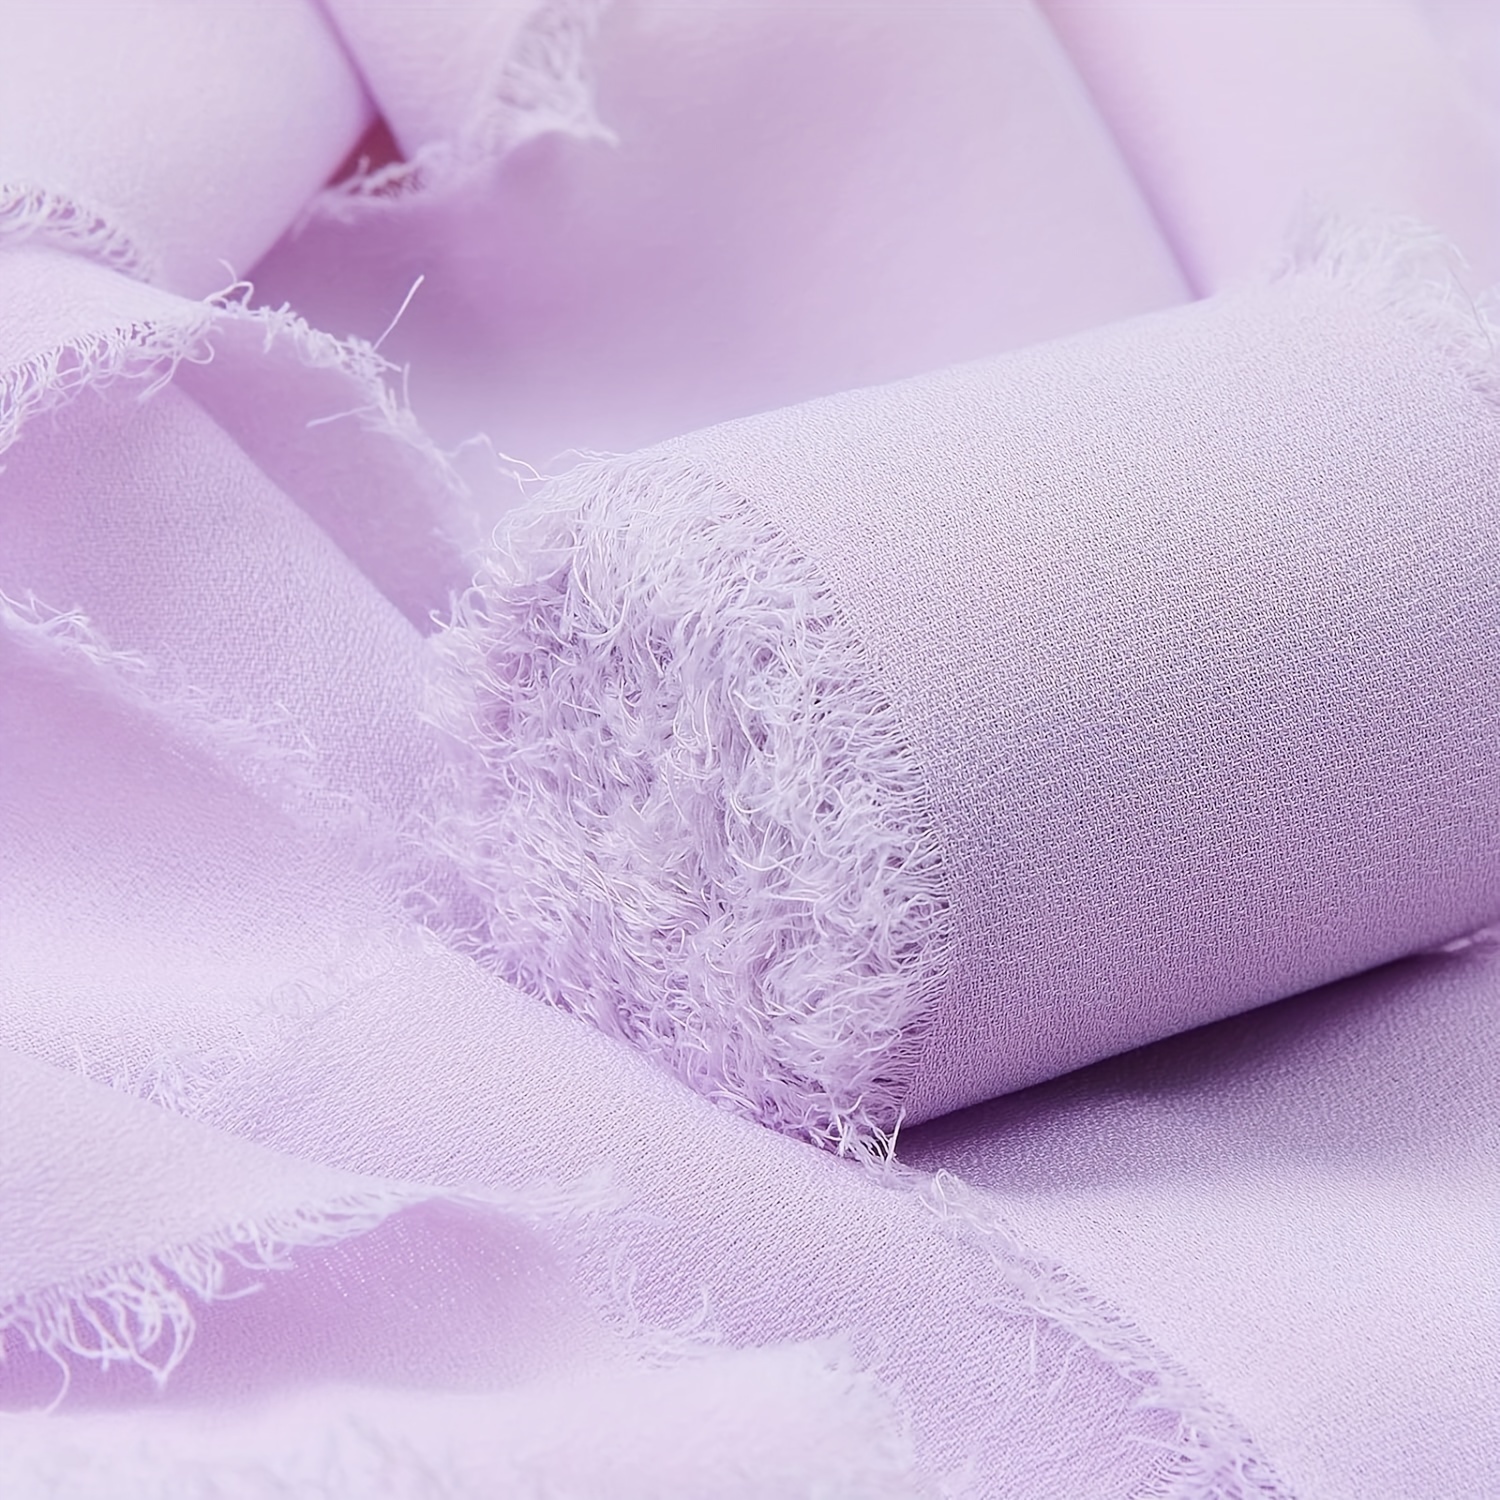 

Light Purple Chiffon Ribbon With Fringe Edge, 4cm X 5m, For Wedding Invitation Packaging, Bridal Bouquet, And Craft Decorations